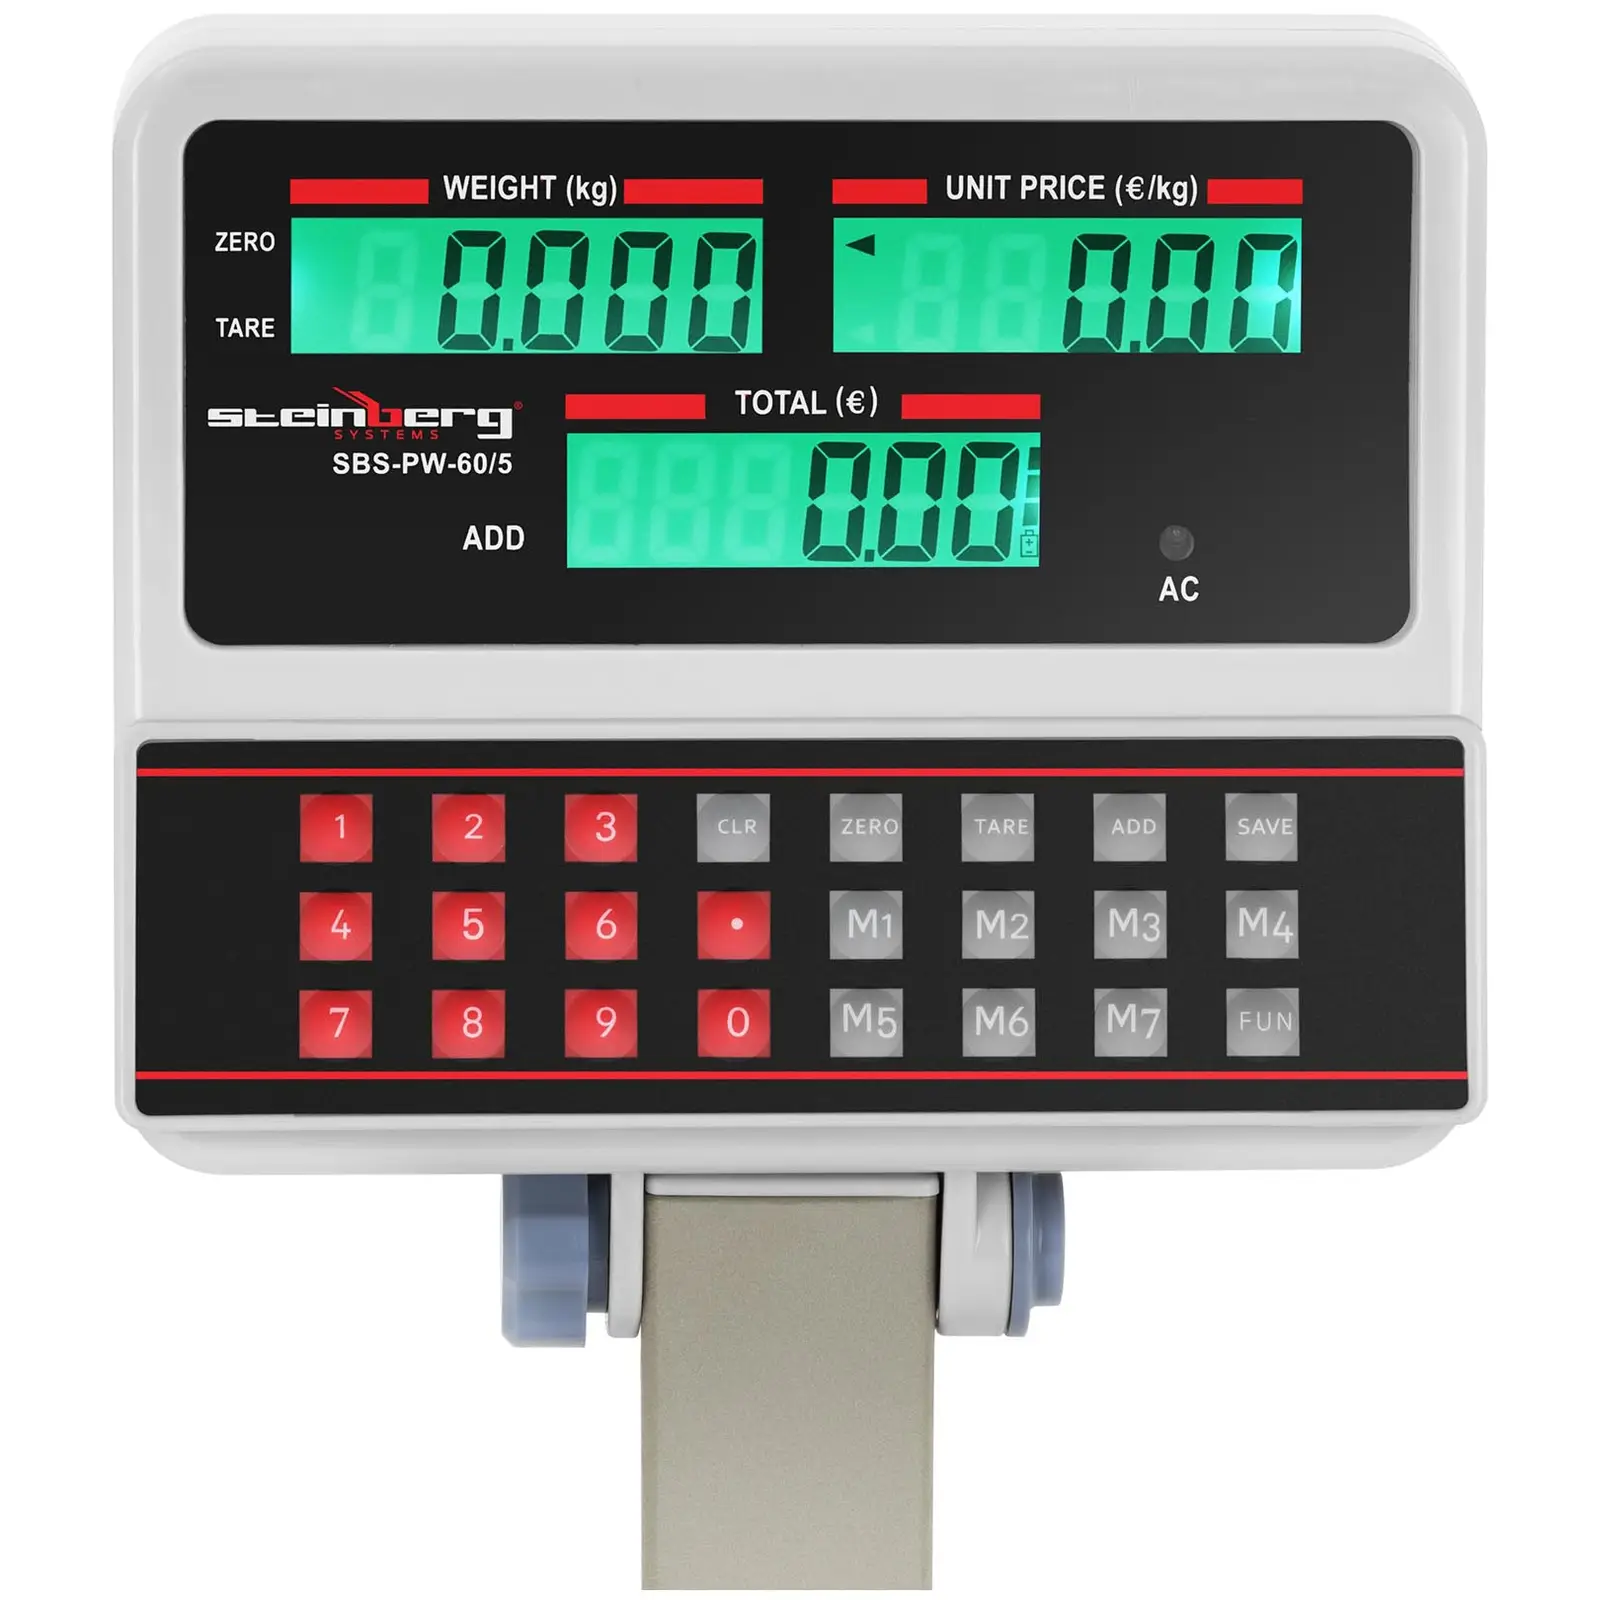 Factory second Digital Weighing Scale with Raised LCD Display - 100 kg / 10 g